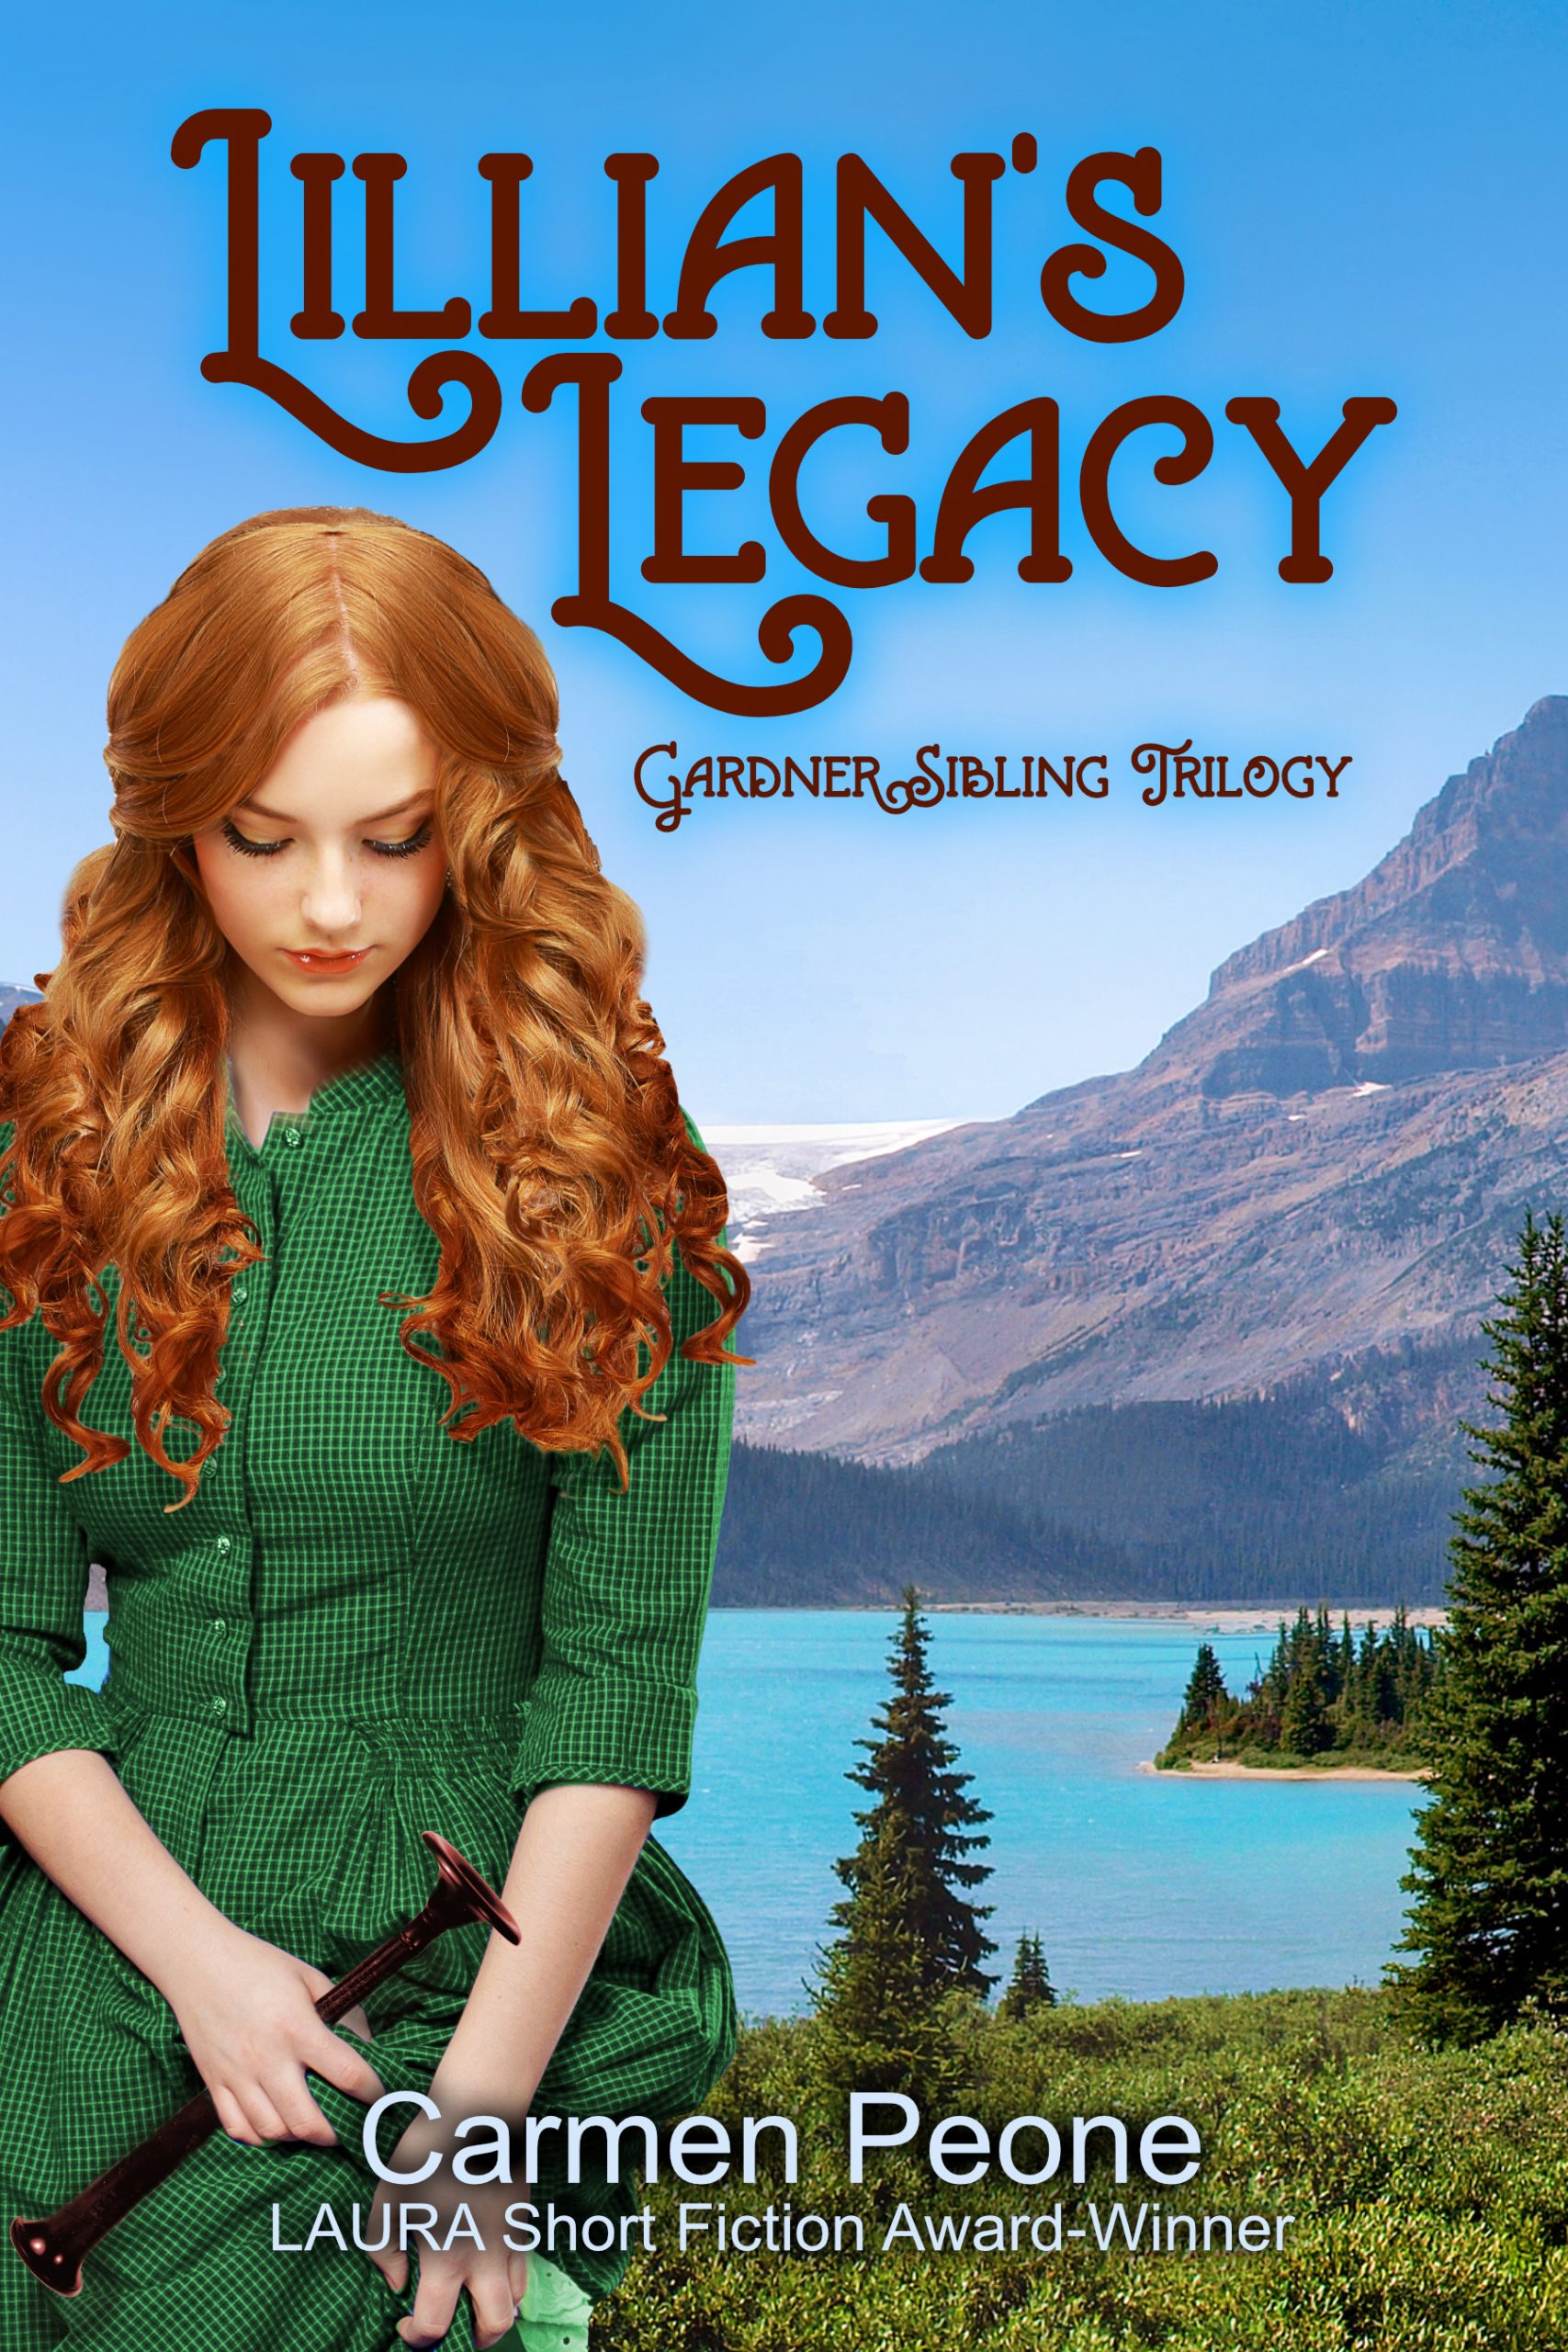 Lillian’s Legacy Pre-launch Interview with Julie Stephens